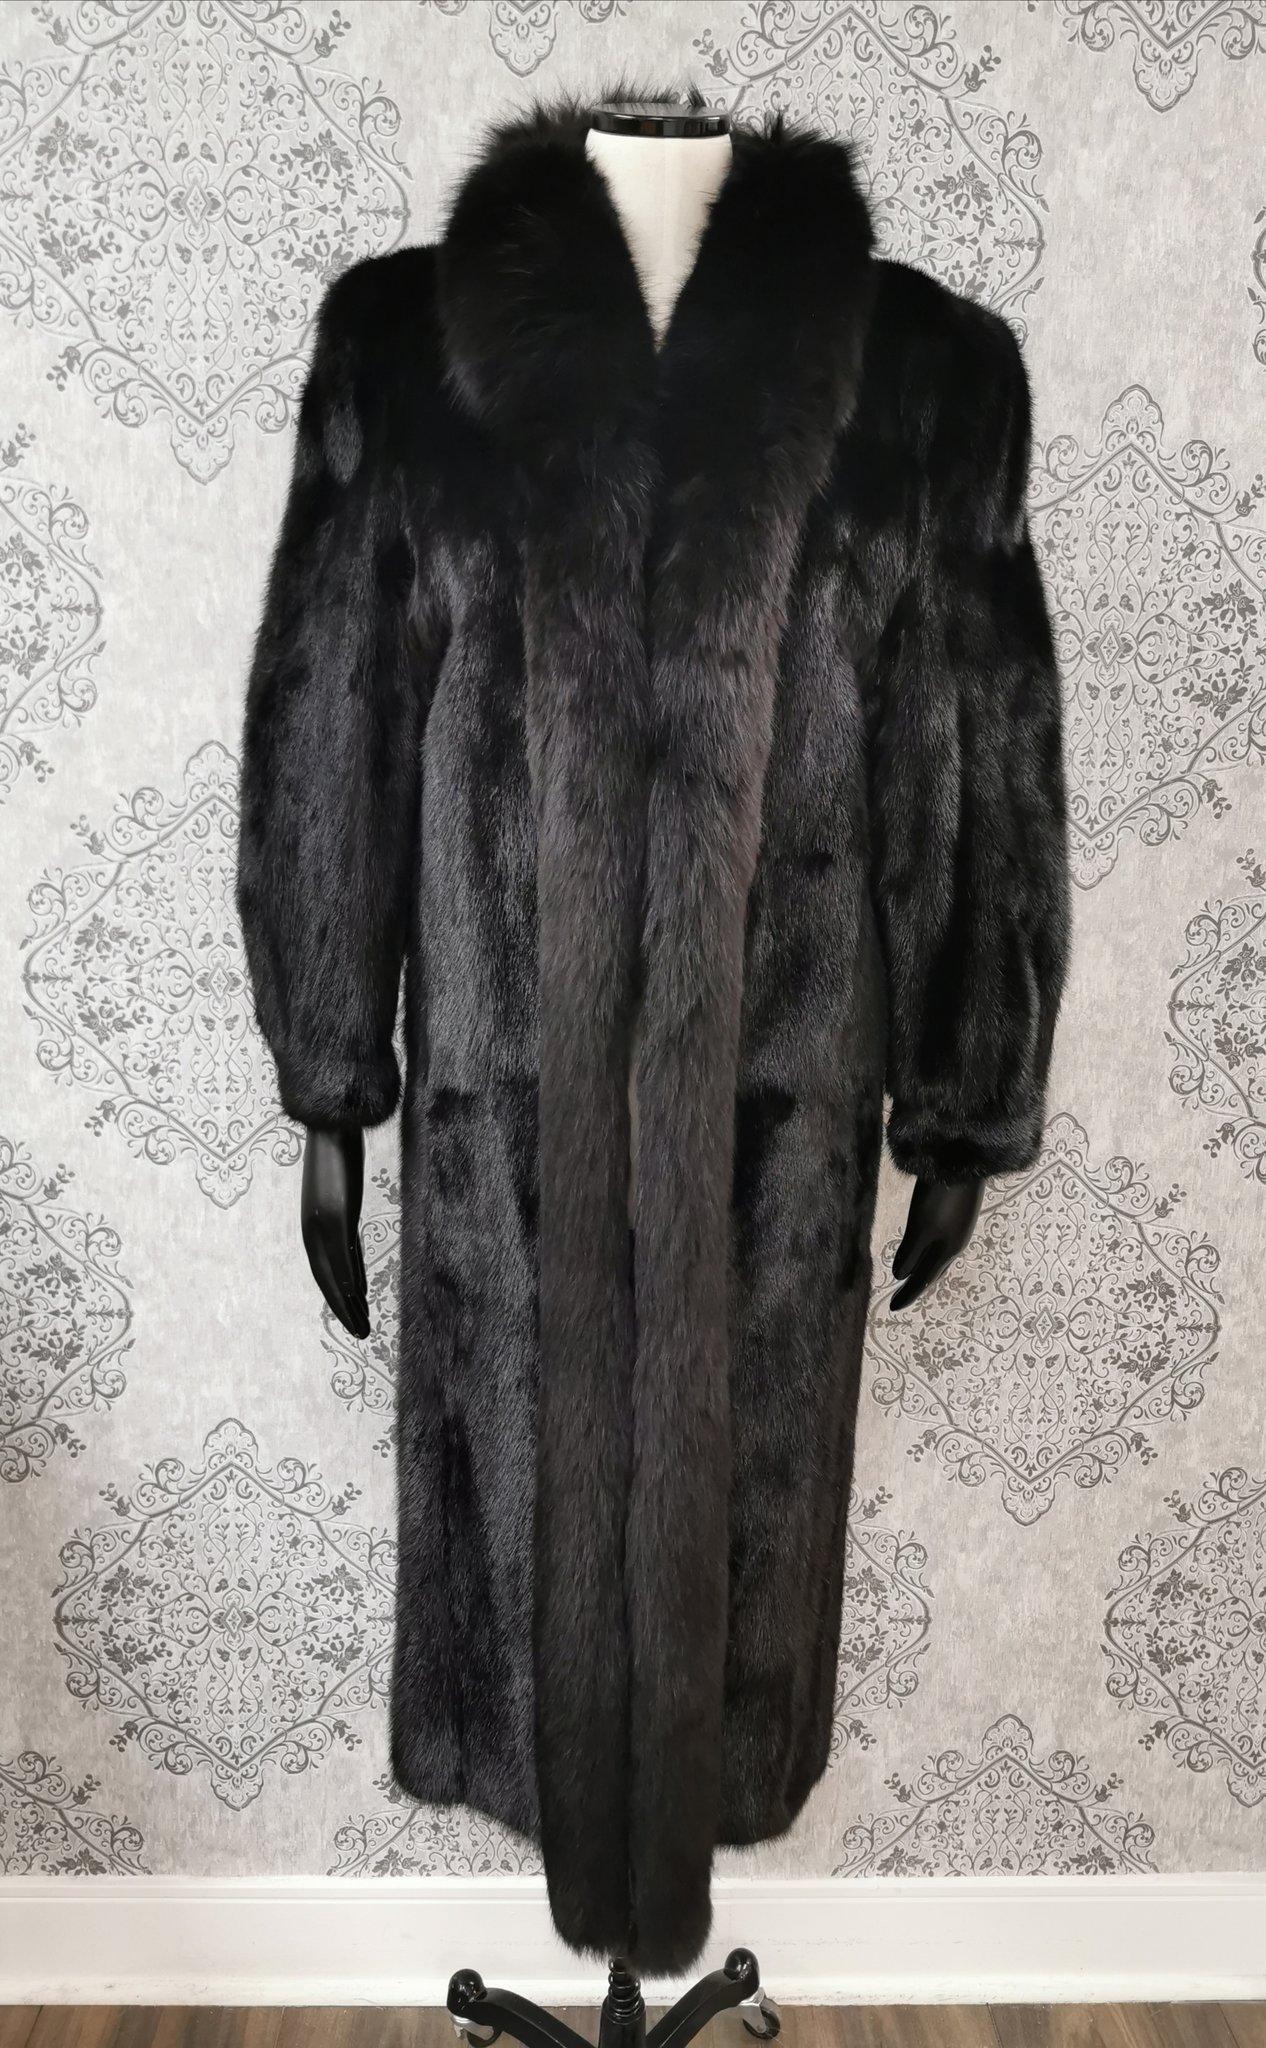 DESCRIPTION : 199 PITCH BLACK MINK FUR COAT WITH DYED SHADOW FOX TRIM SIZE 10 

Tuxedo collar, supple skins,beautiful fresh fur, european german clasps for closure, too slit pockets, nice big full pelts skins in excellent condition.

Brand : Eaton